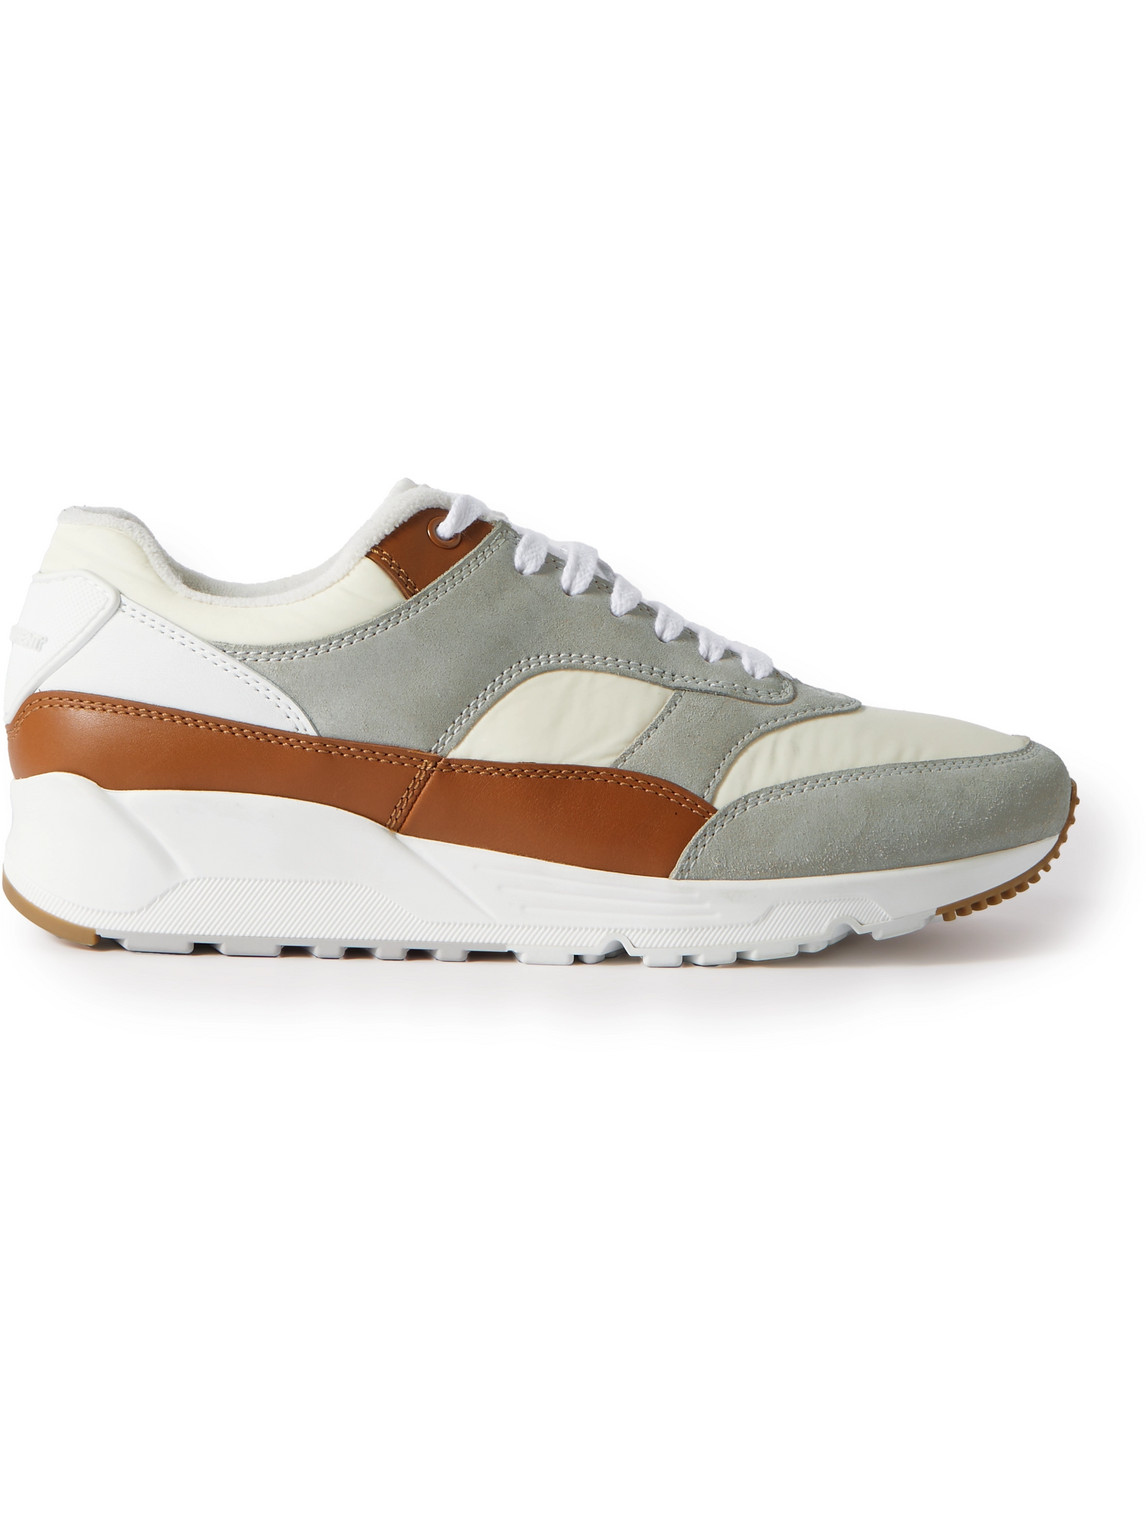 Saint Laurent Bump Colour-block Suede, Shell And Leather Low-top Sneakers In Gray